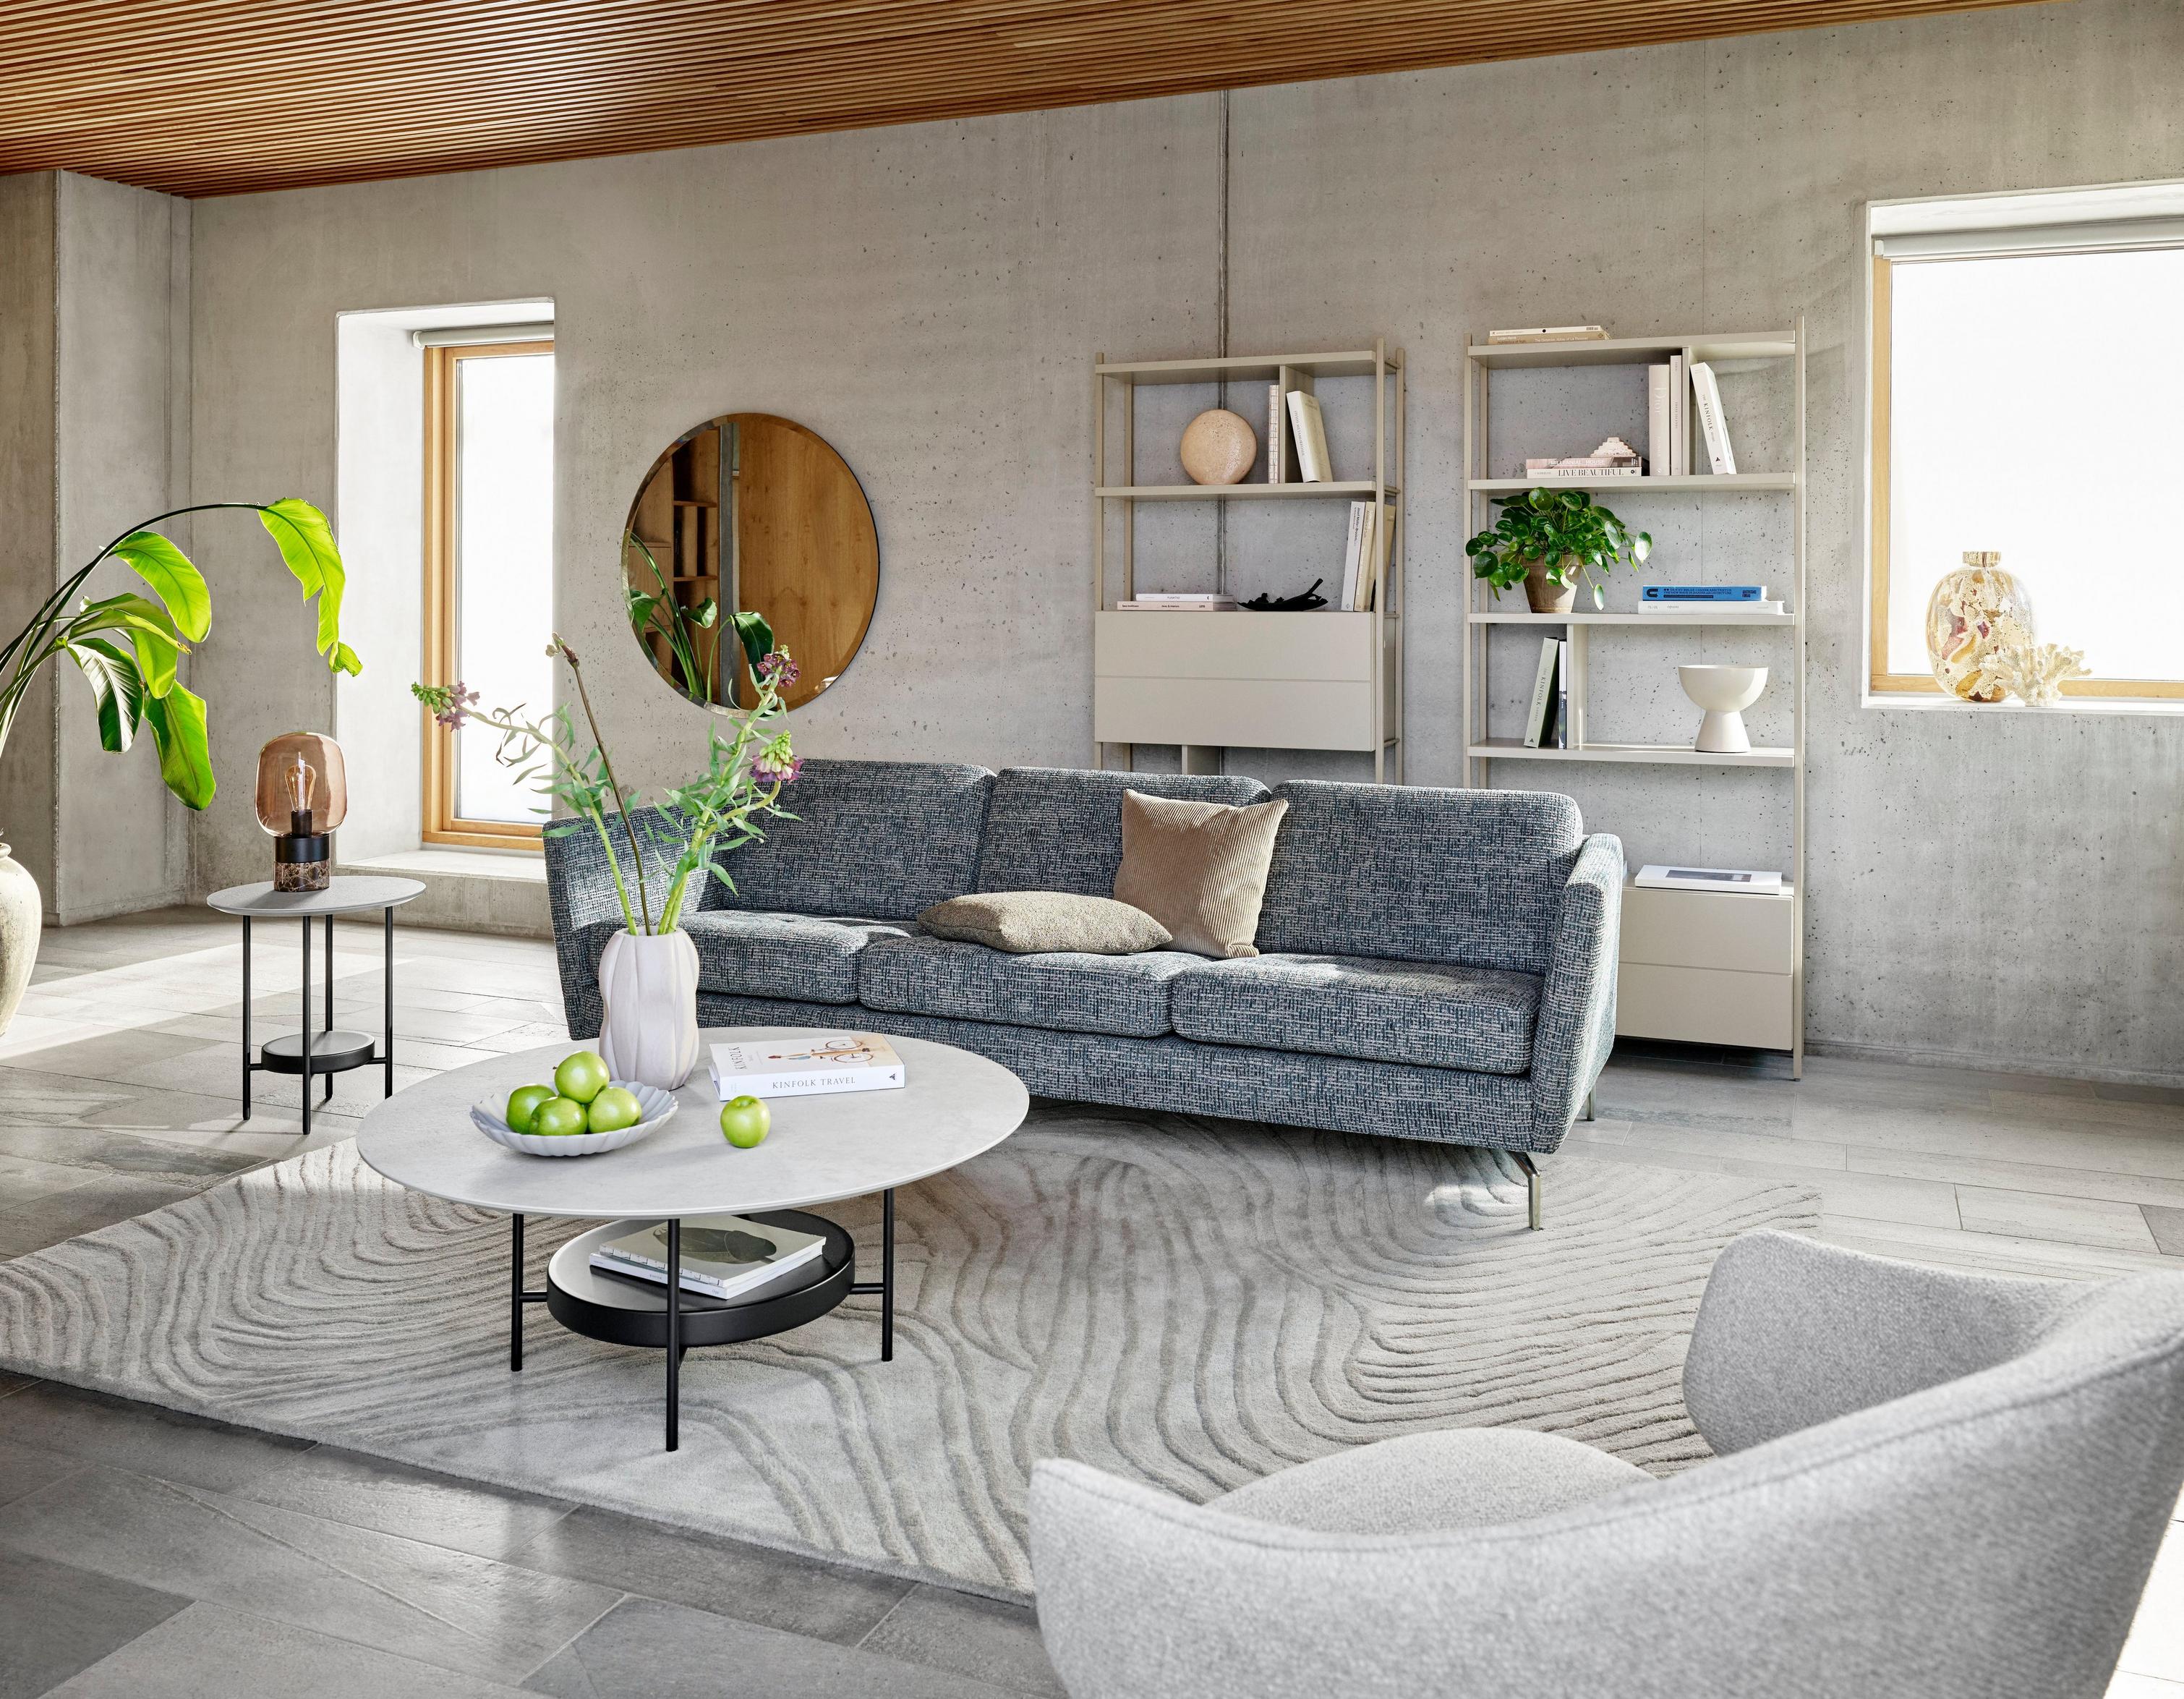 Bright living space featuring the Osaka sofa in blue Tuscany fabric.